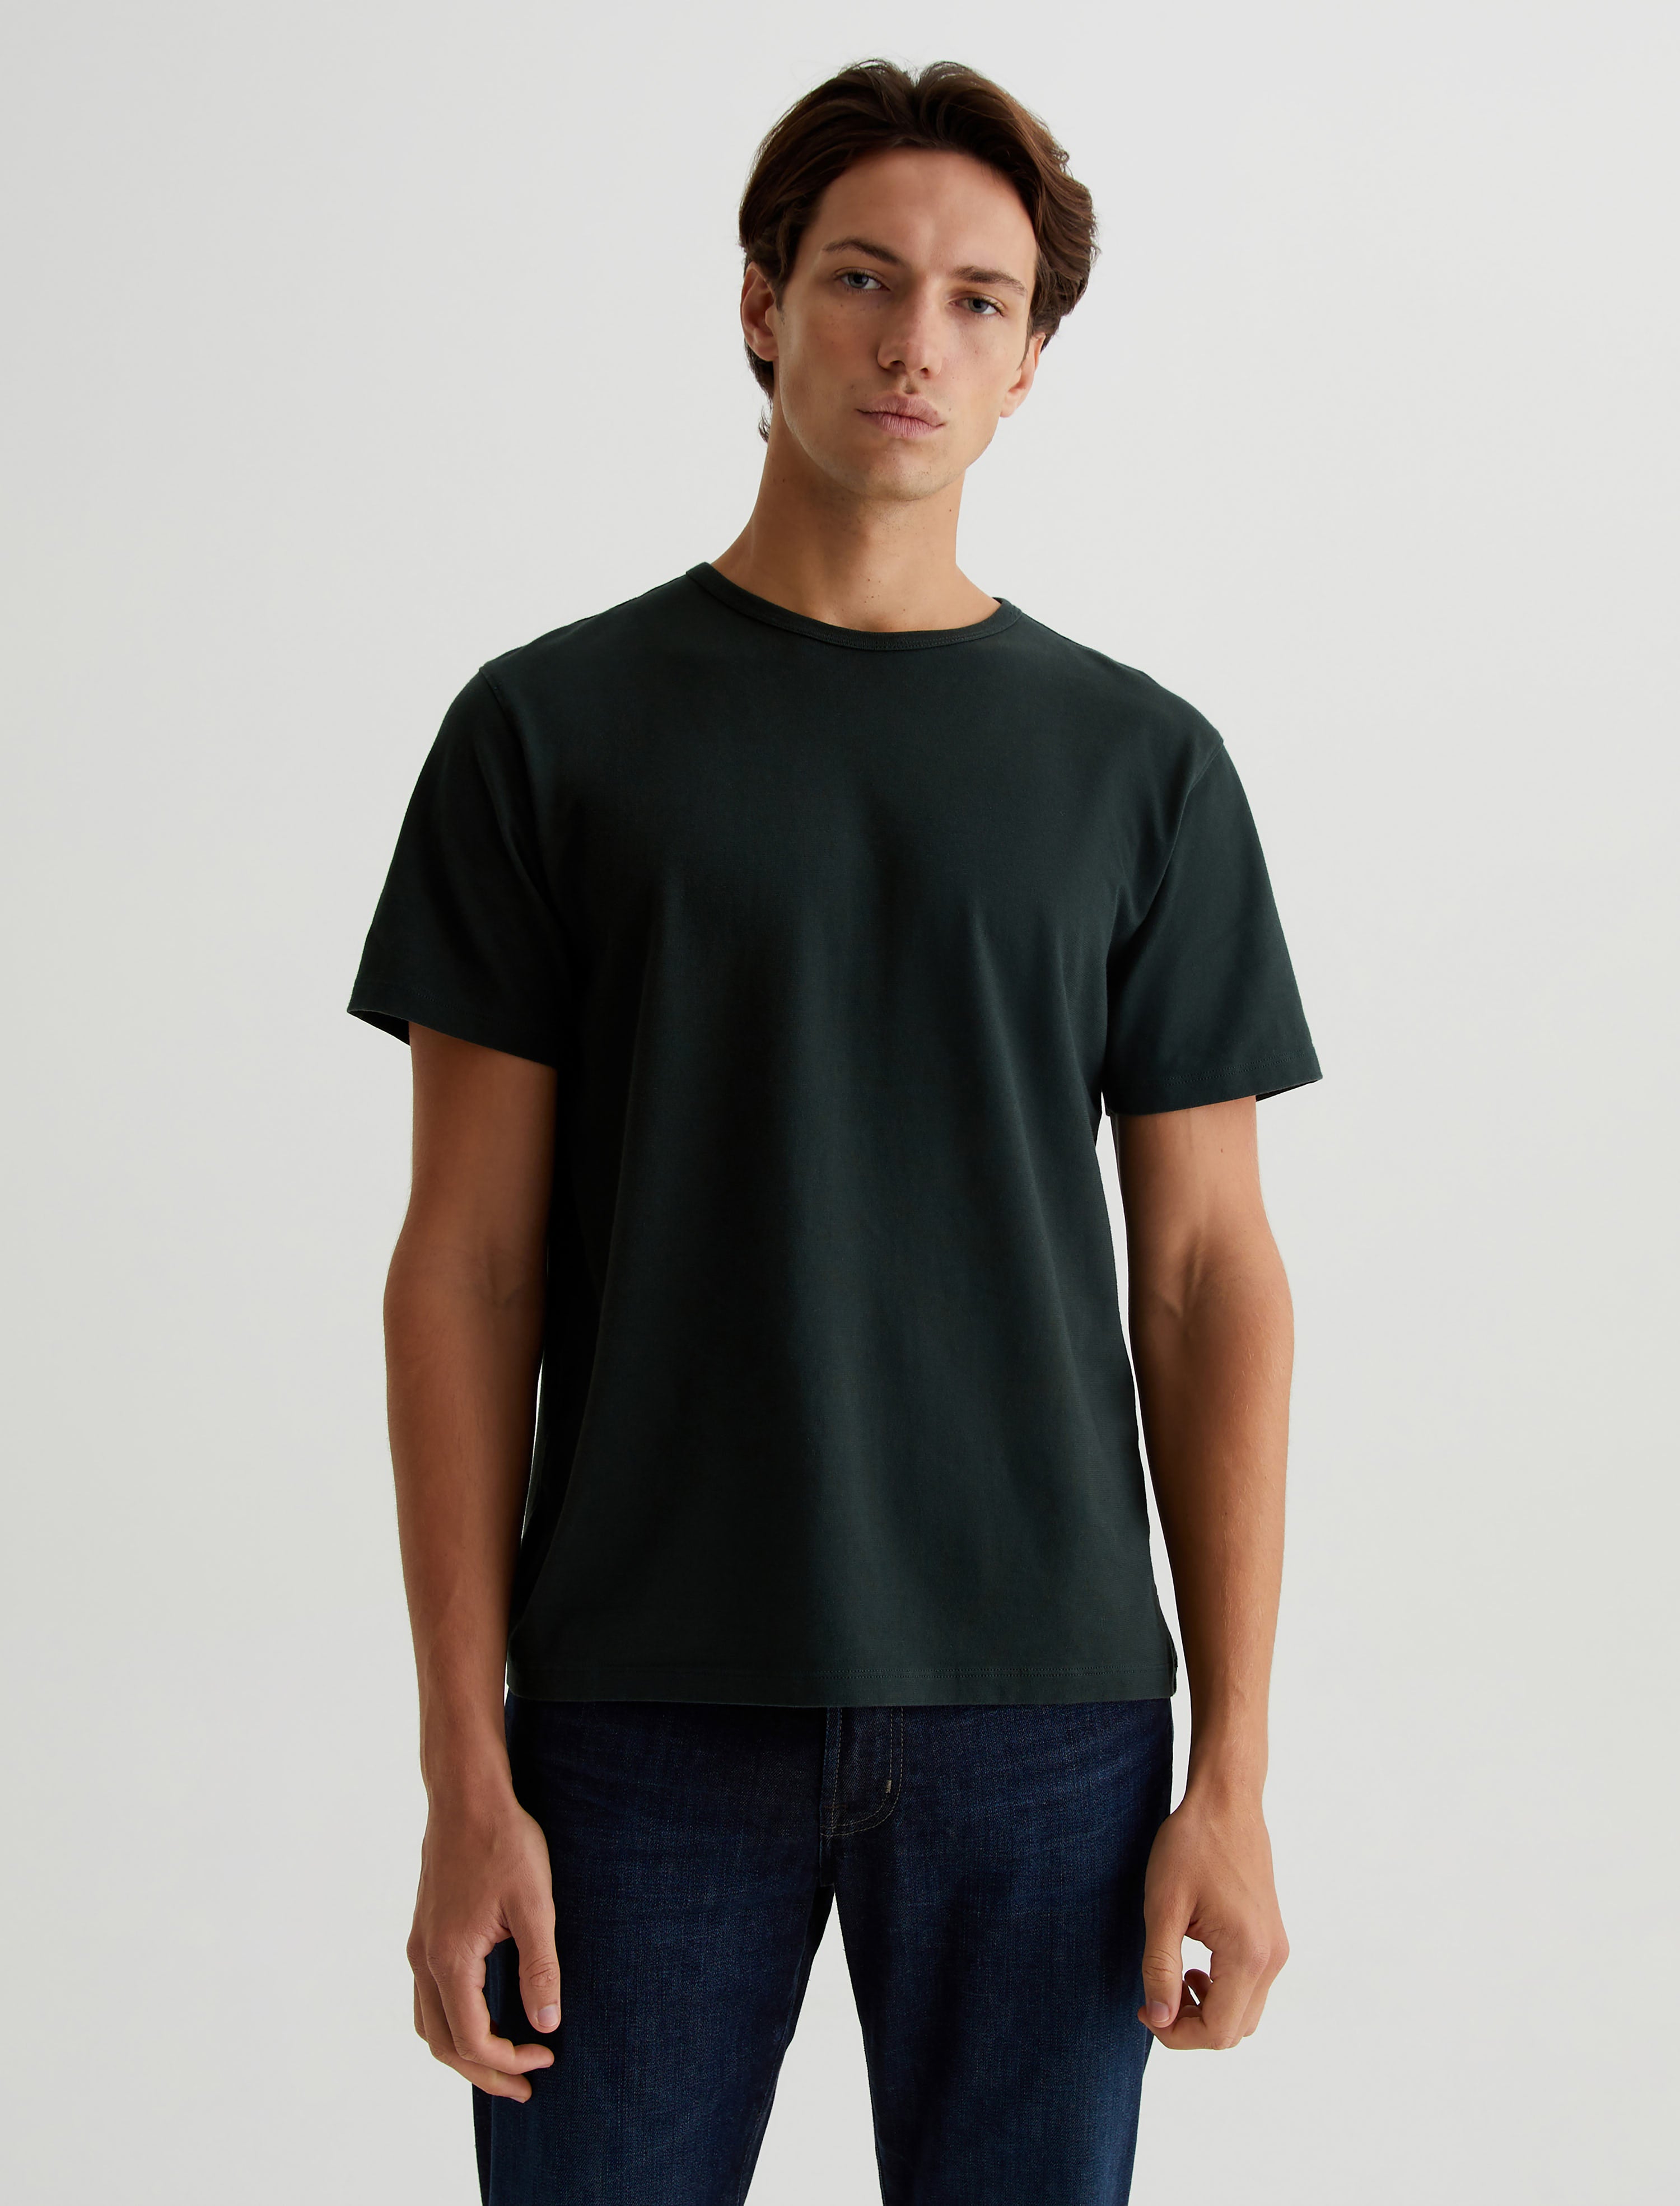 Men's Tees at AG Jeans Official Store